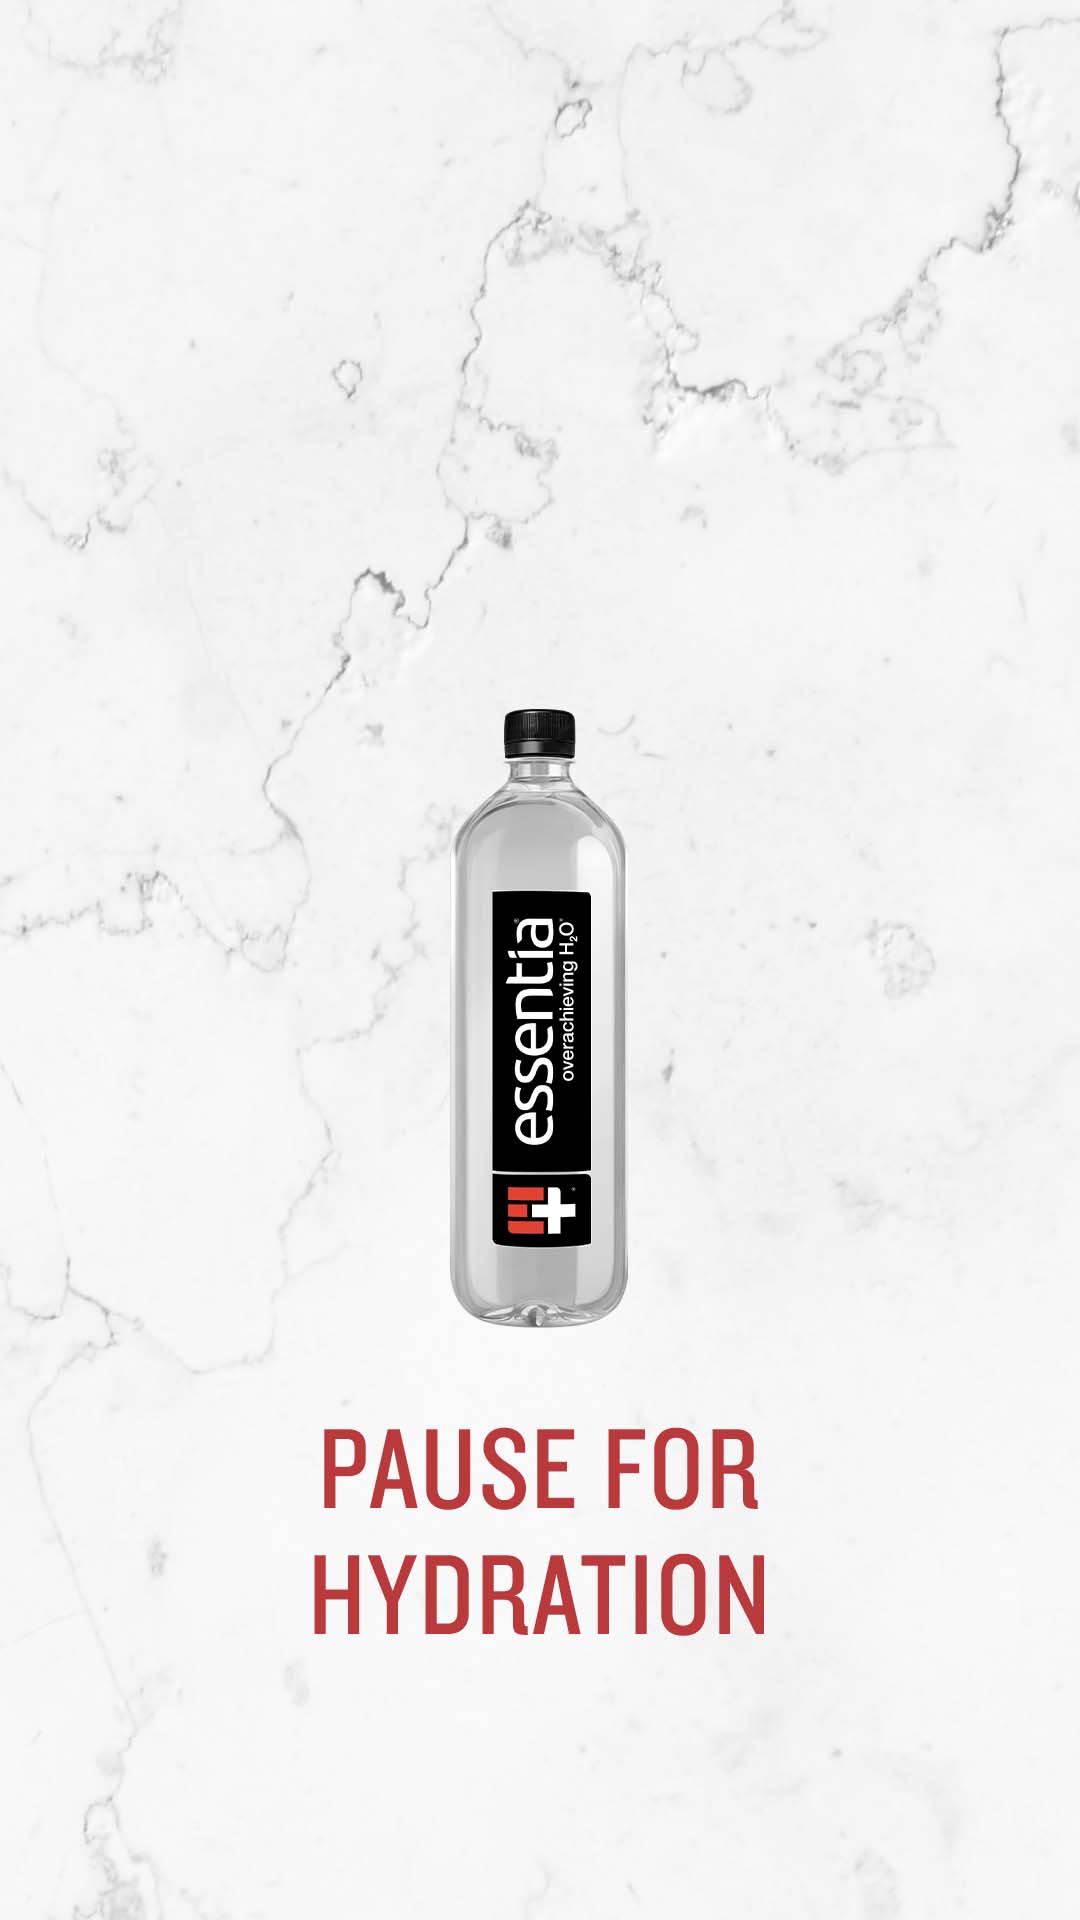 Essentia Water Pause for Hydration Wallpaper